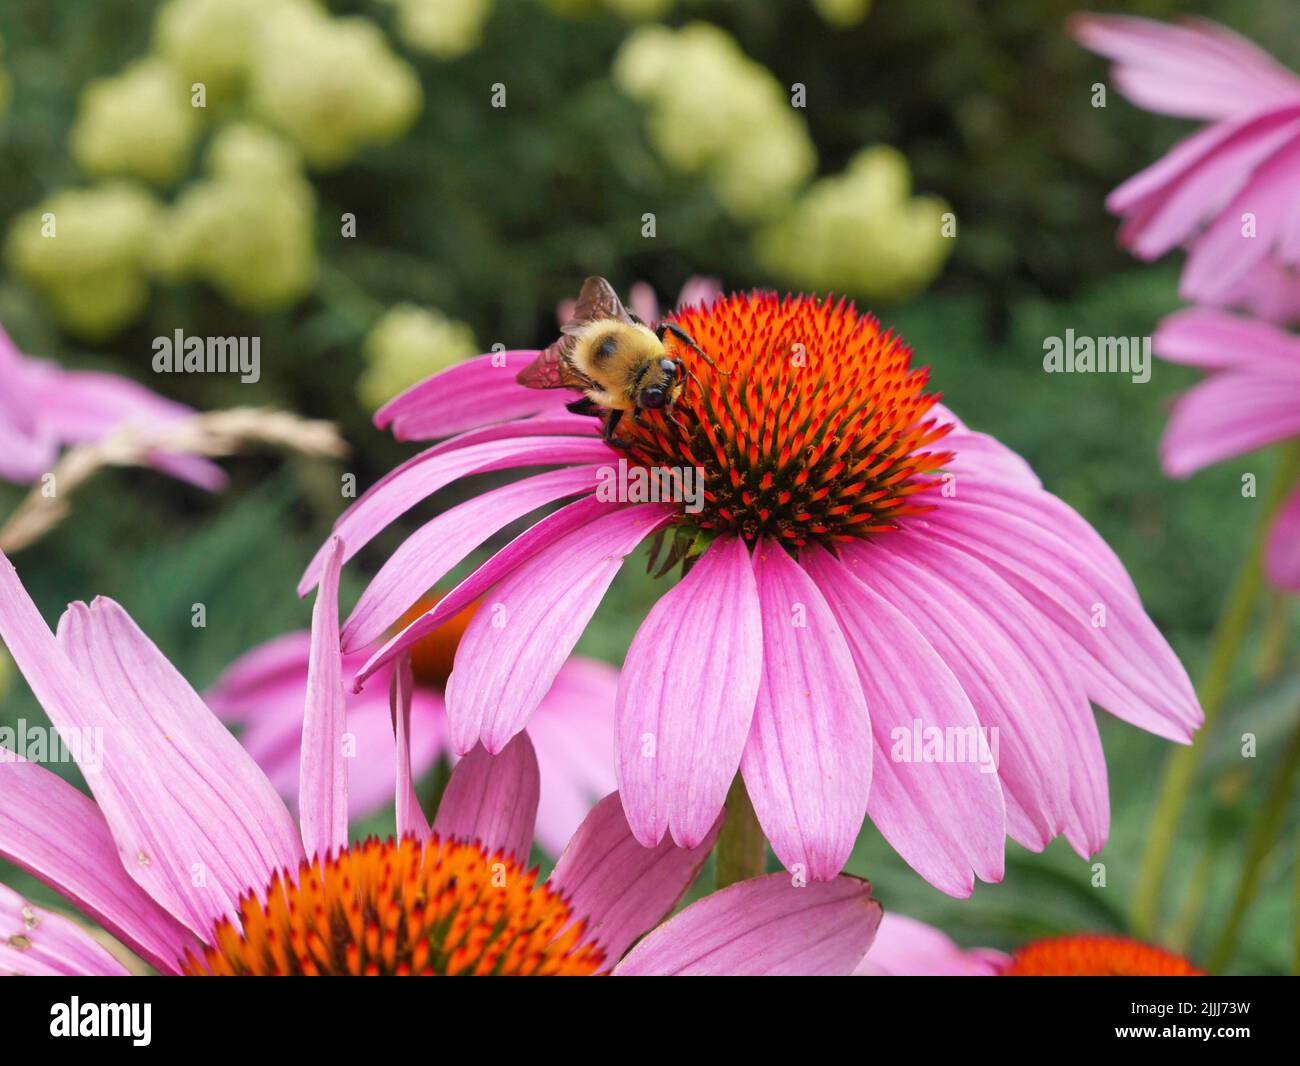 Purple coneflower being visited by a bumblebee Stock Photo